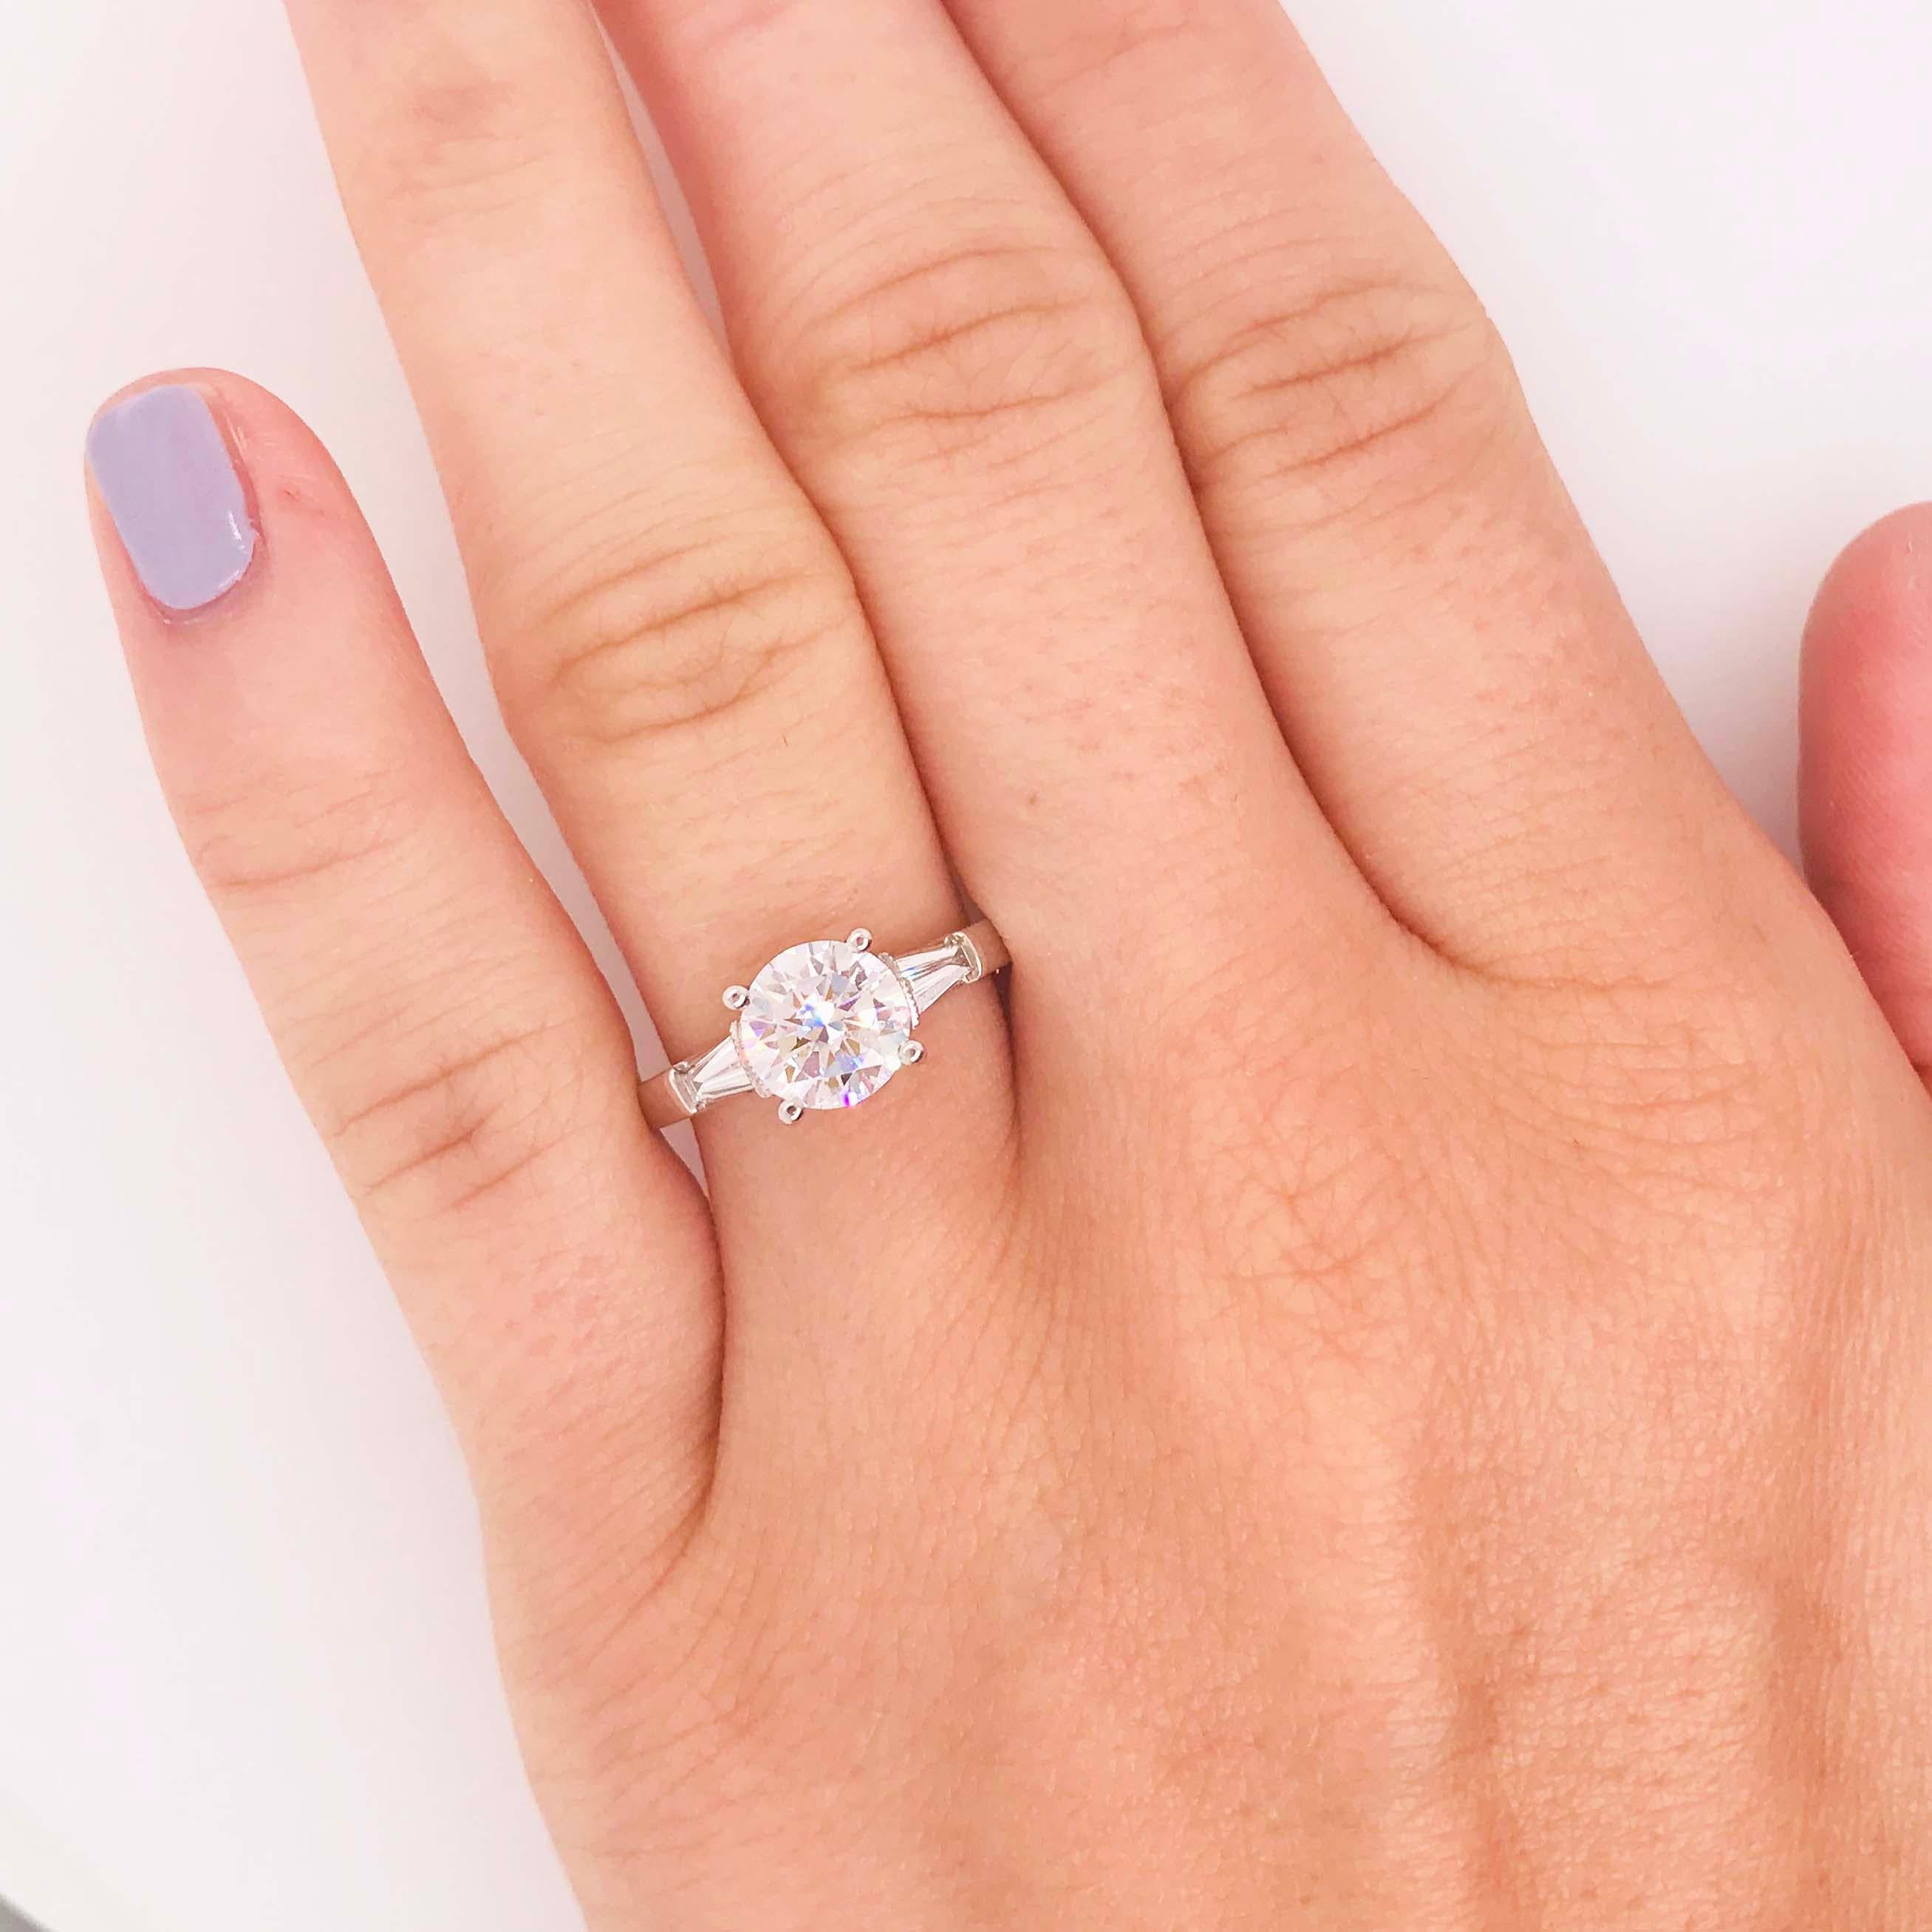 The stunning traditional three stone diamond engagement ring is a classic design! With a GIA certified round brilliant diamond set in the center. The center diamond is flanked by a tapered baguette on each side. This ring has a total diamond carat